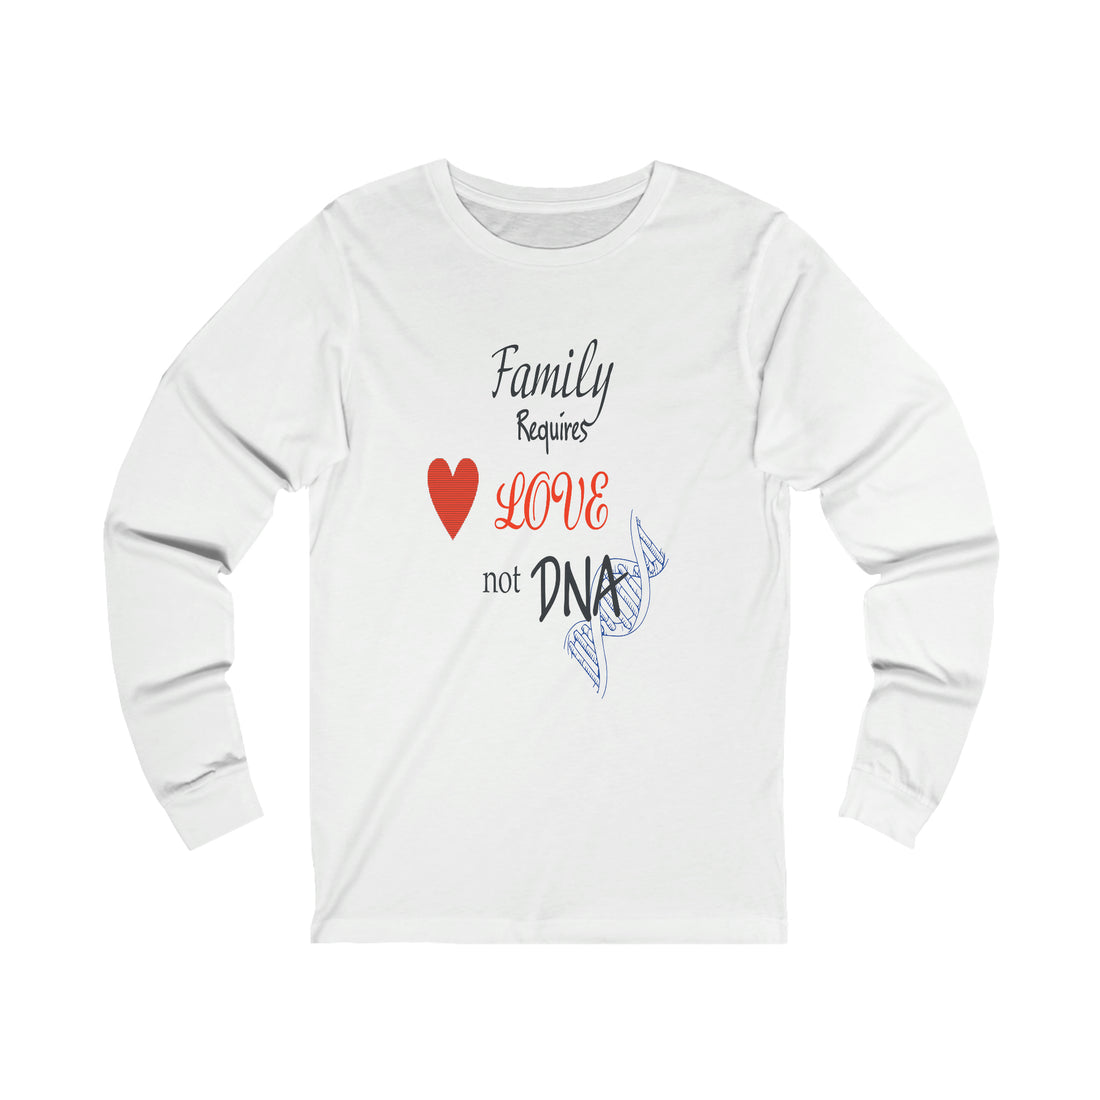 Family Requires Love Not DNA - Unisex Jersey Long Sleeve Tee